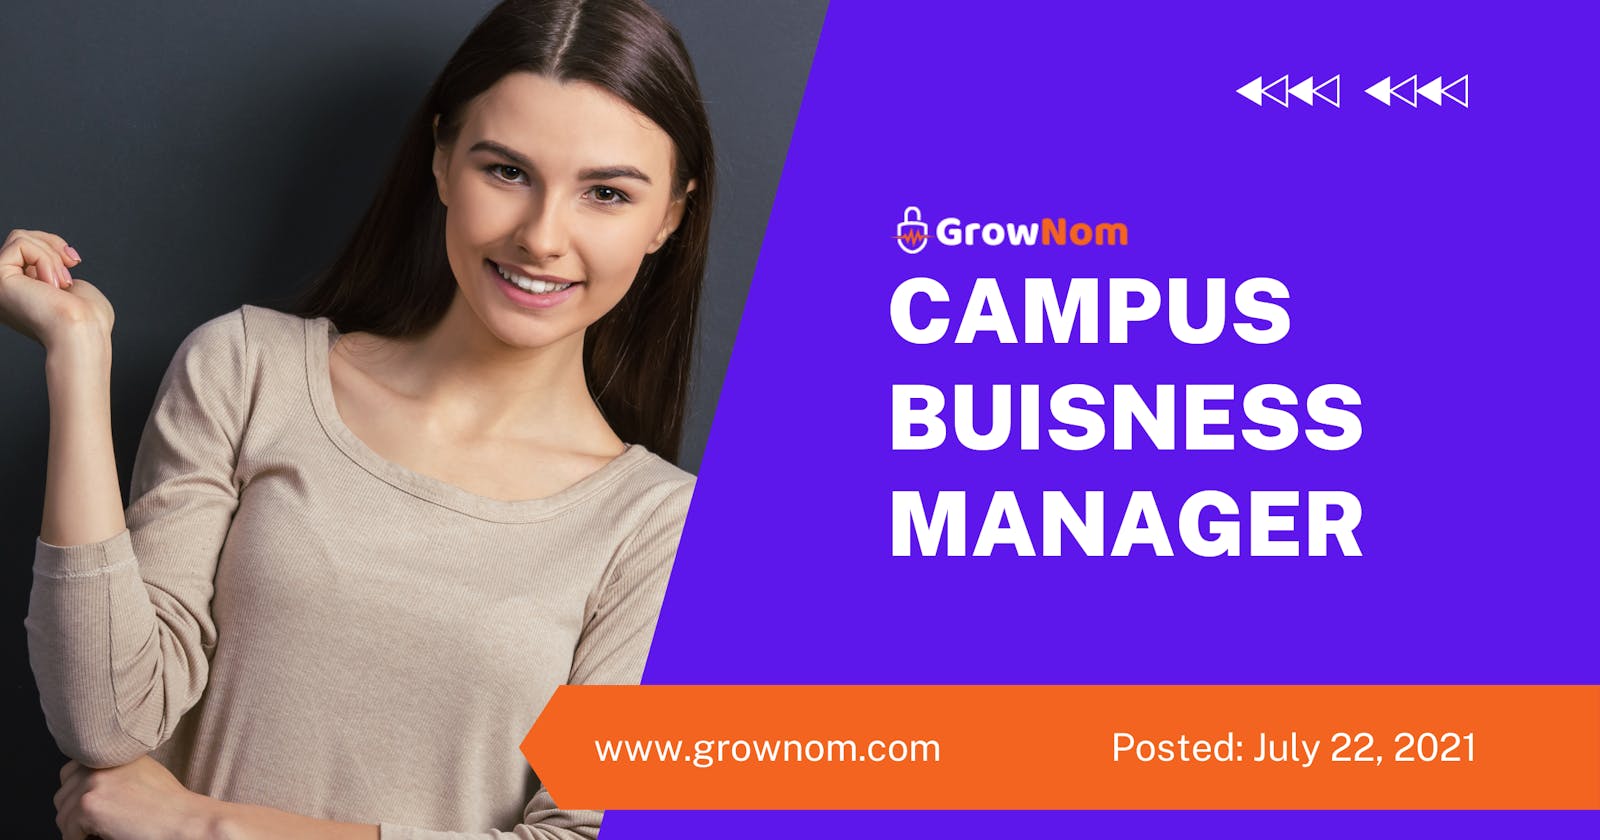 Grownom Campus Business Manager